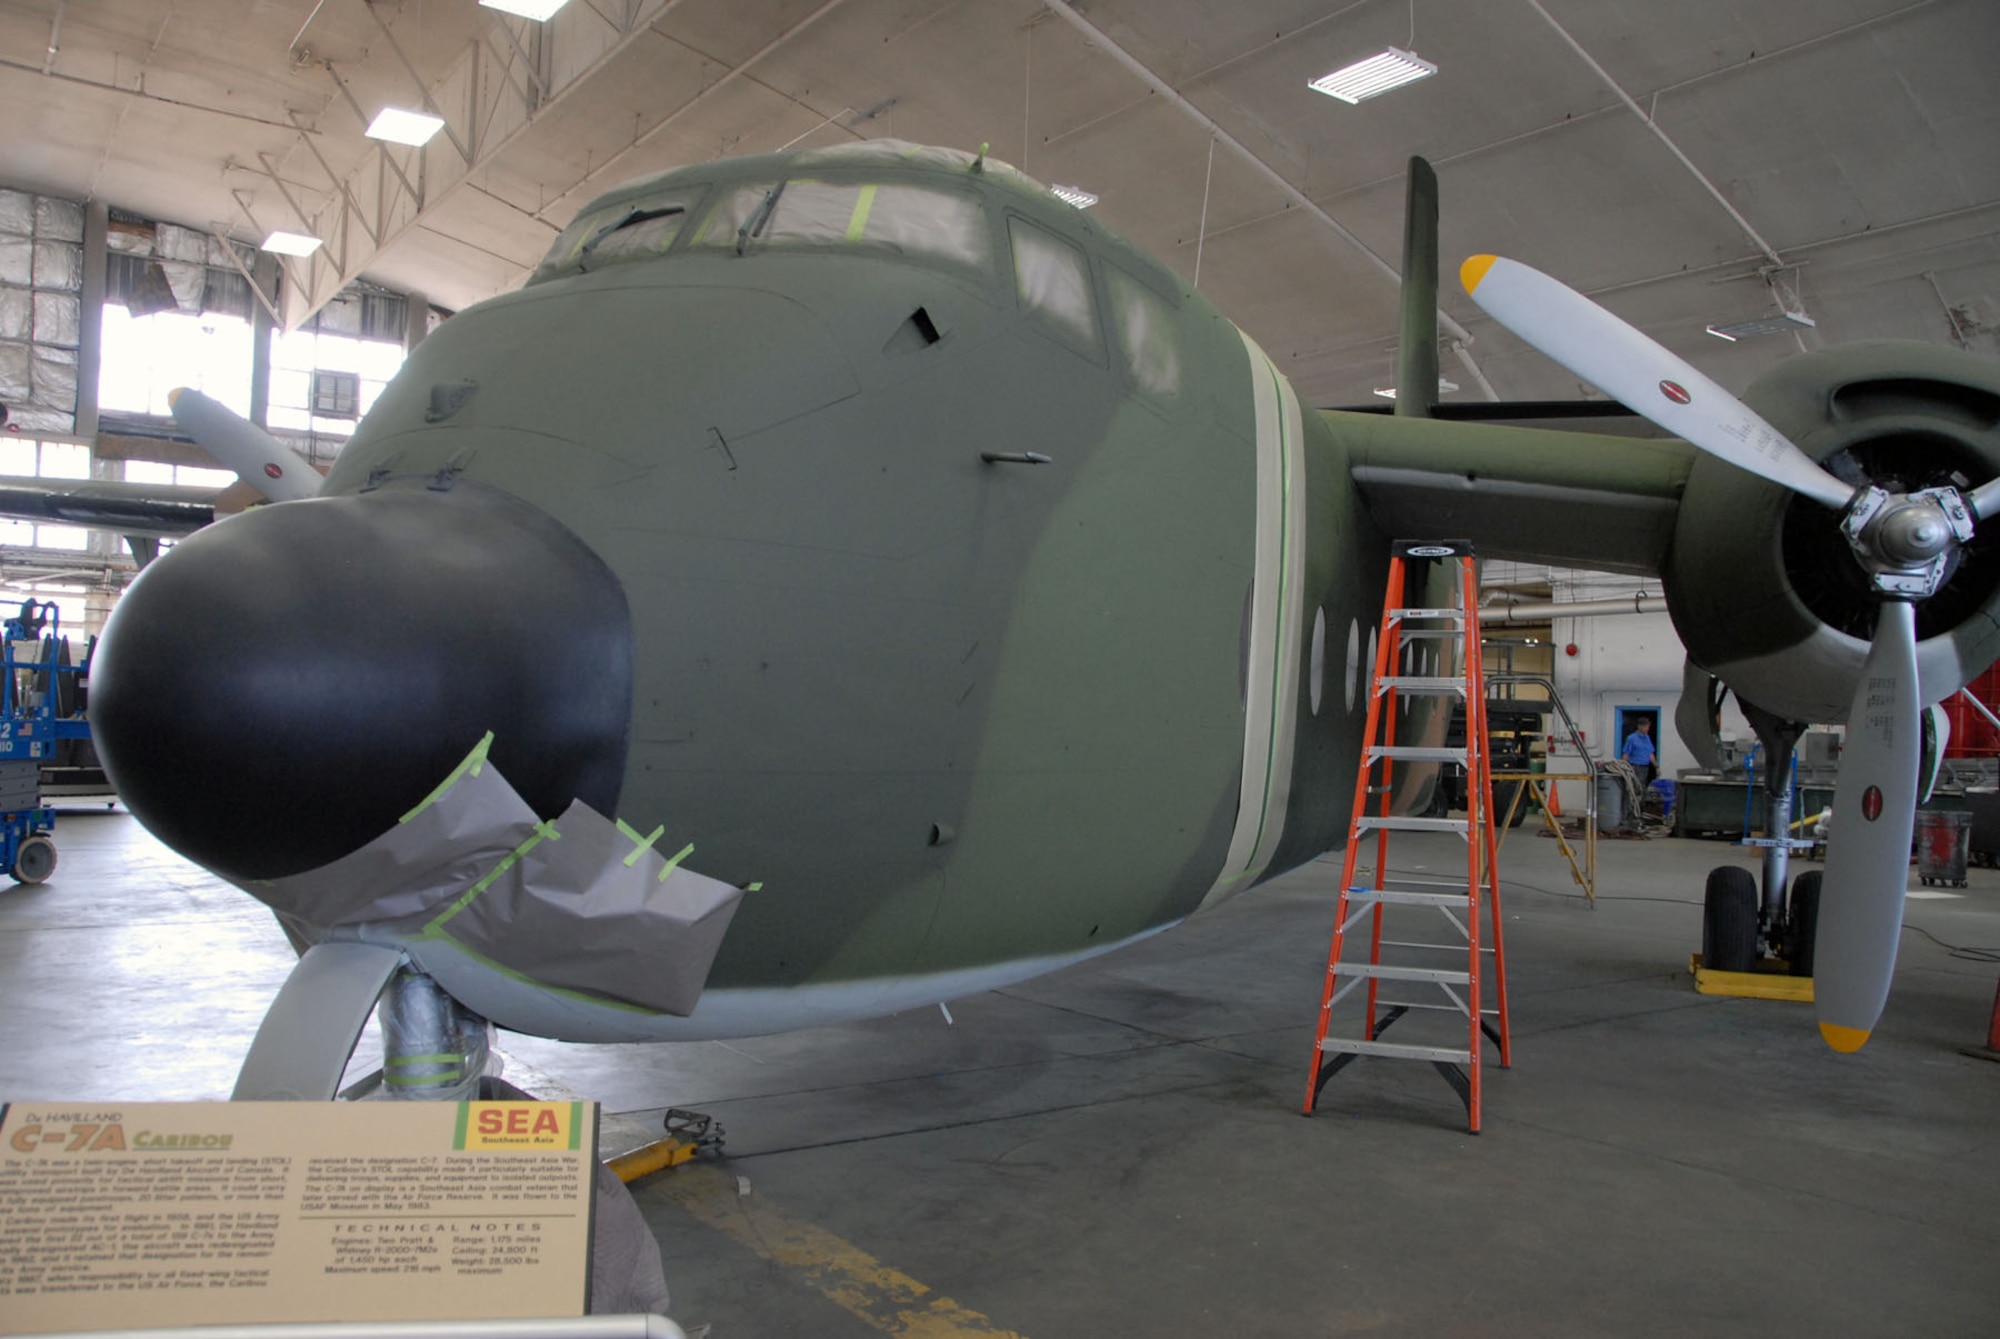 DAYTON, Ohio (09/2010) -- De Havilland C-7A undergoing restoration at the National Museum of the U.S. Air Force. (U.S. Air Force phto)